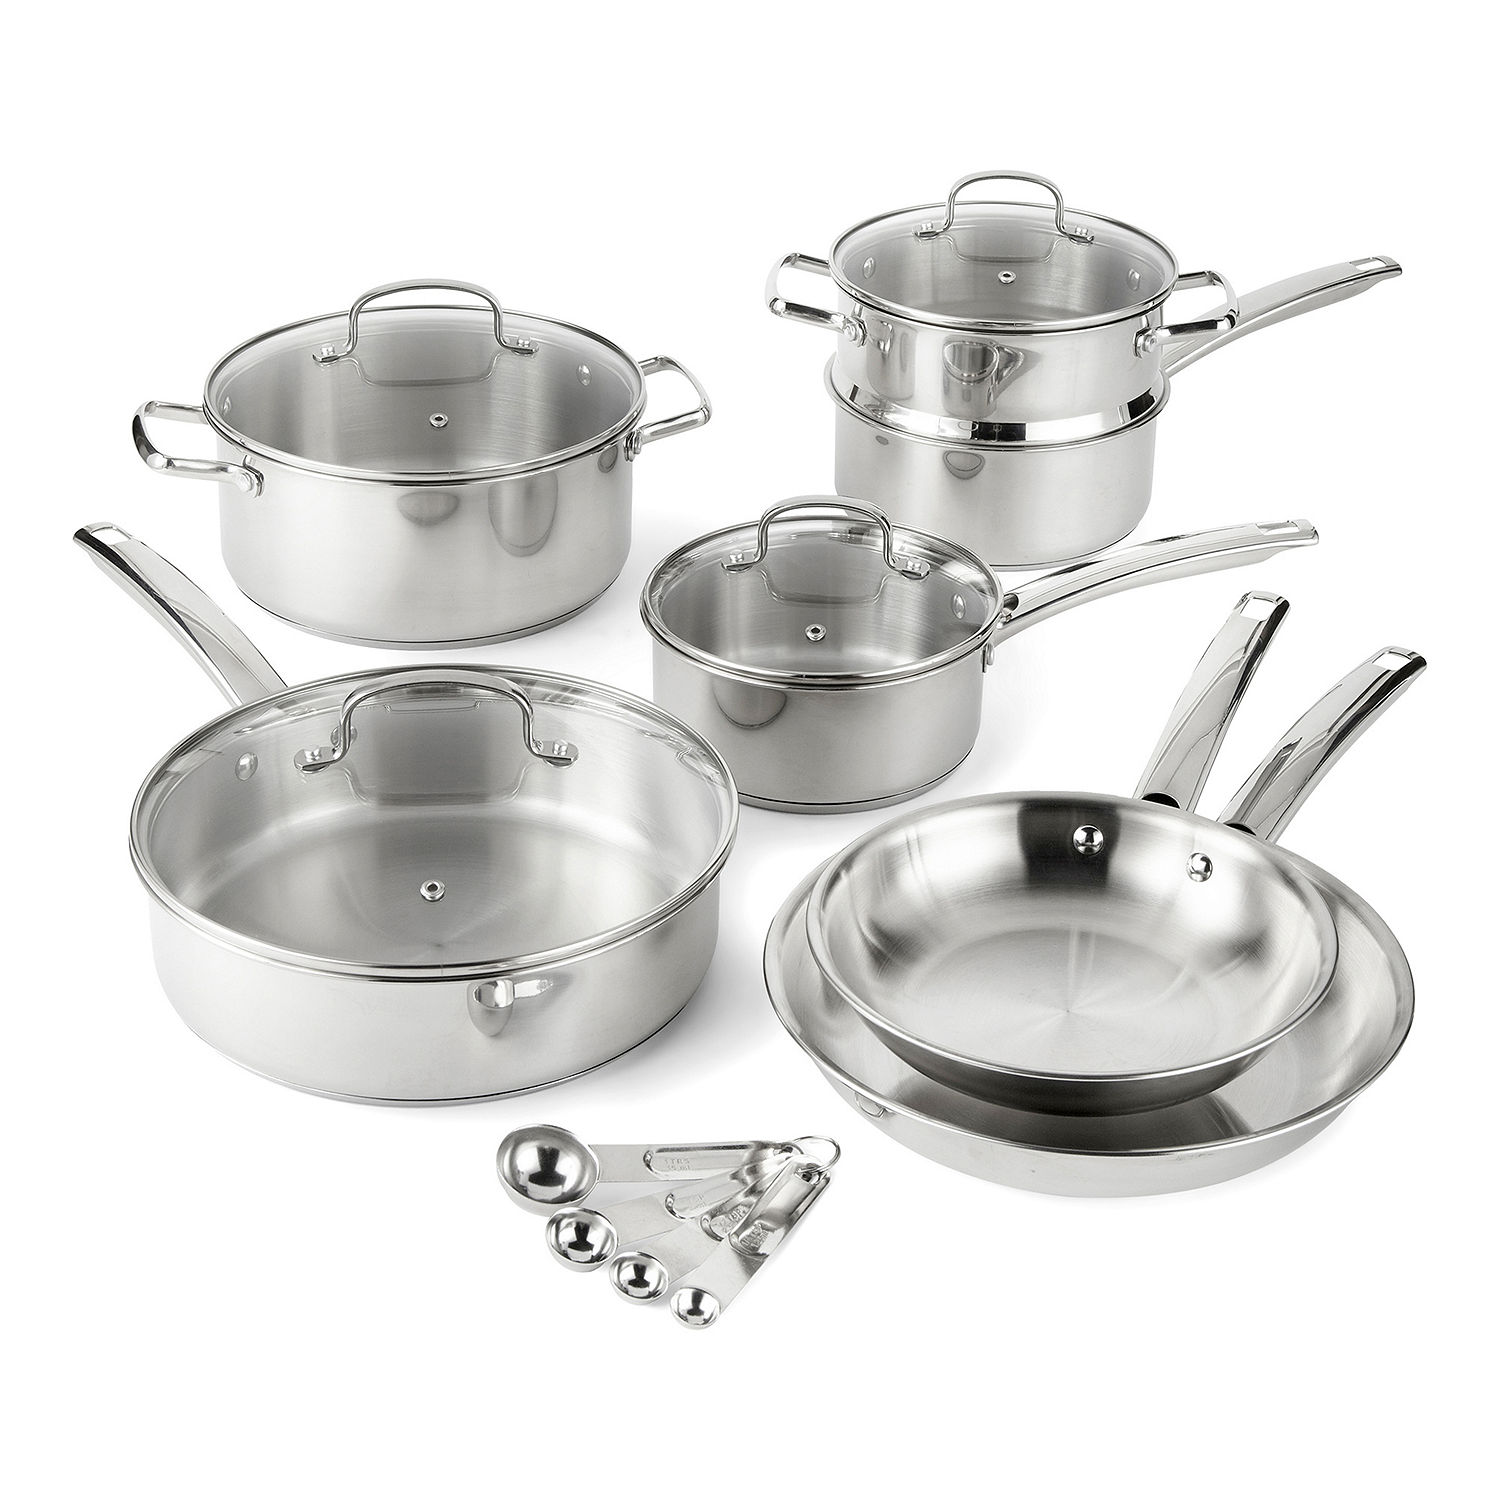 Cooks Stainless Steel 15-pc. Cookware Set, Color: Stainless Steel ...